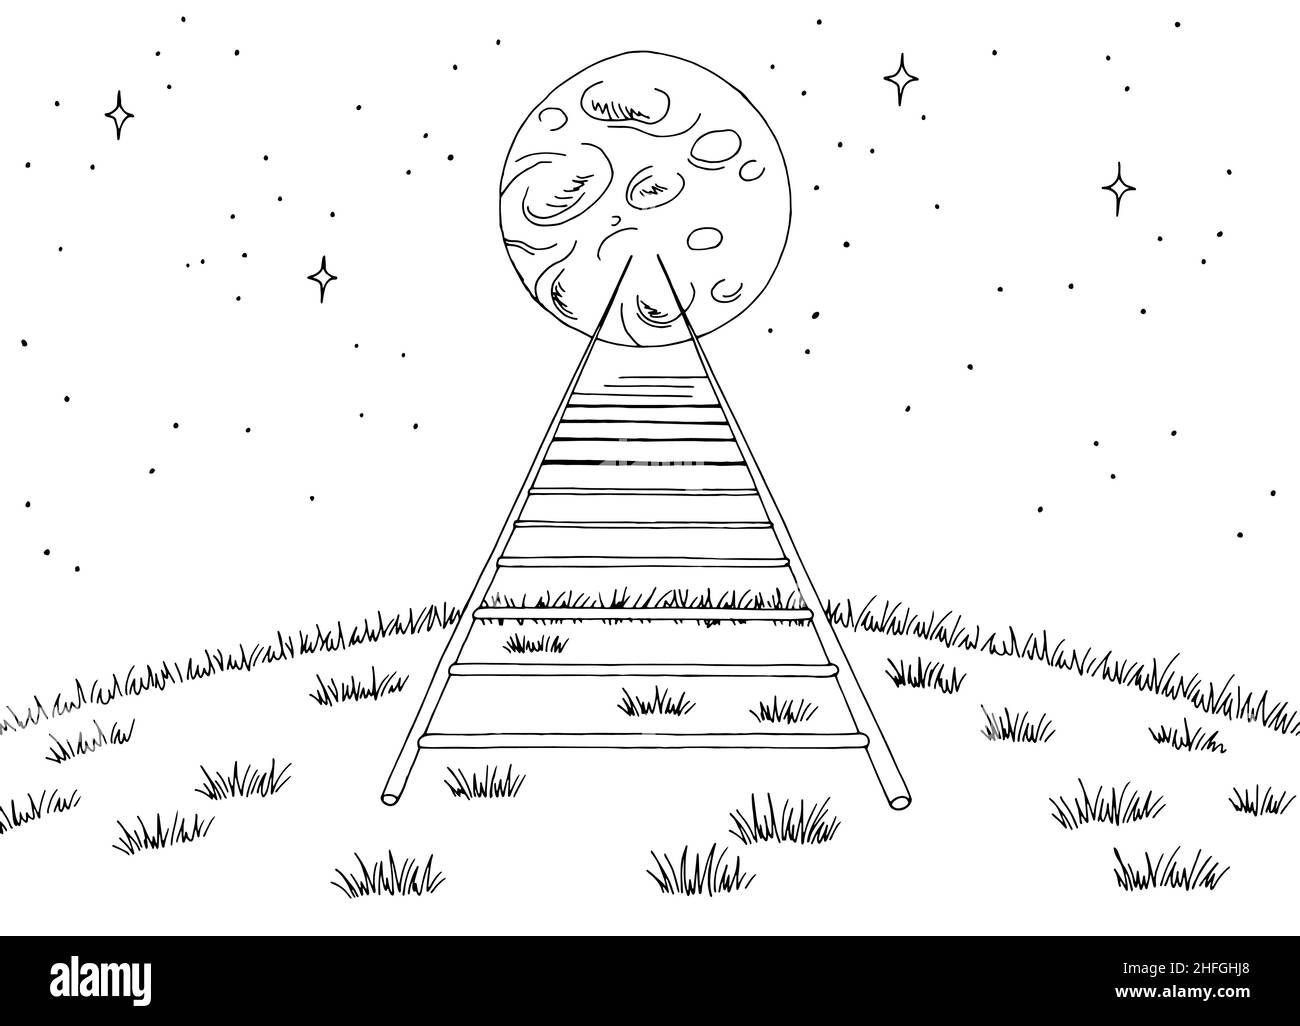 Ladder to the moon landscape graphic black white sketch illustration vector Stock Vector